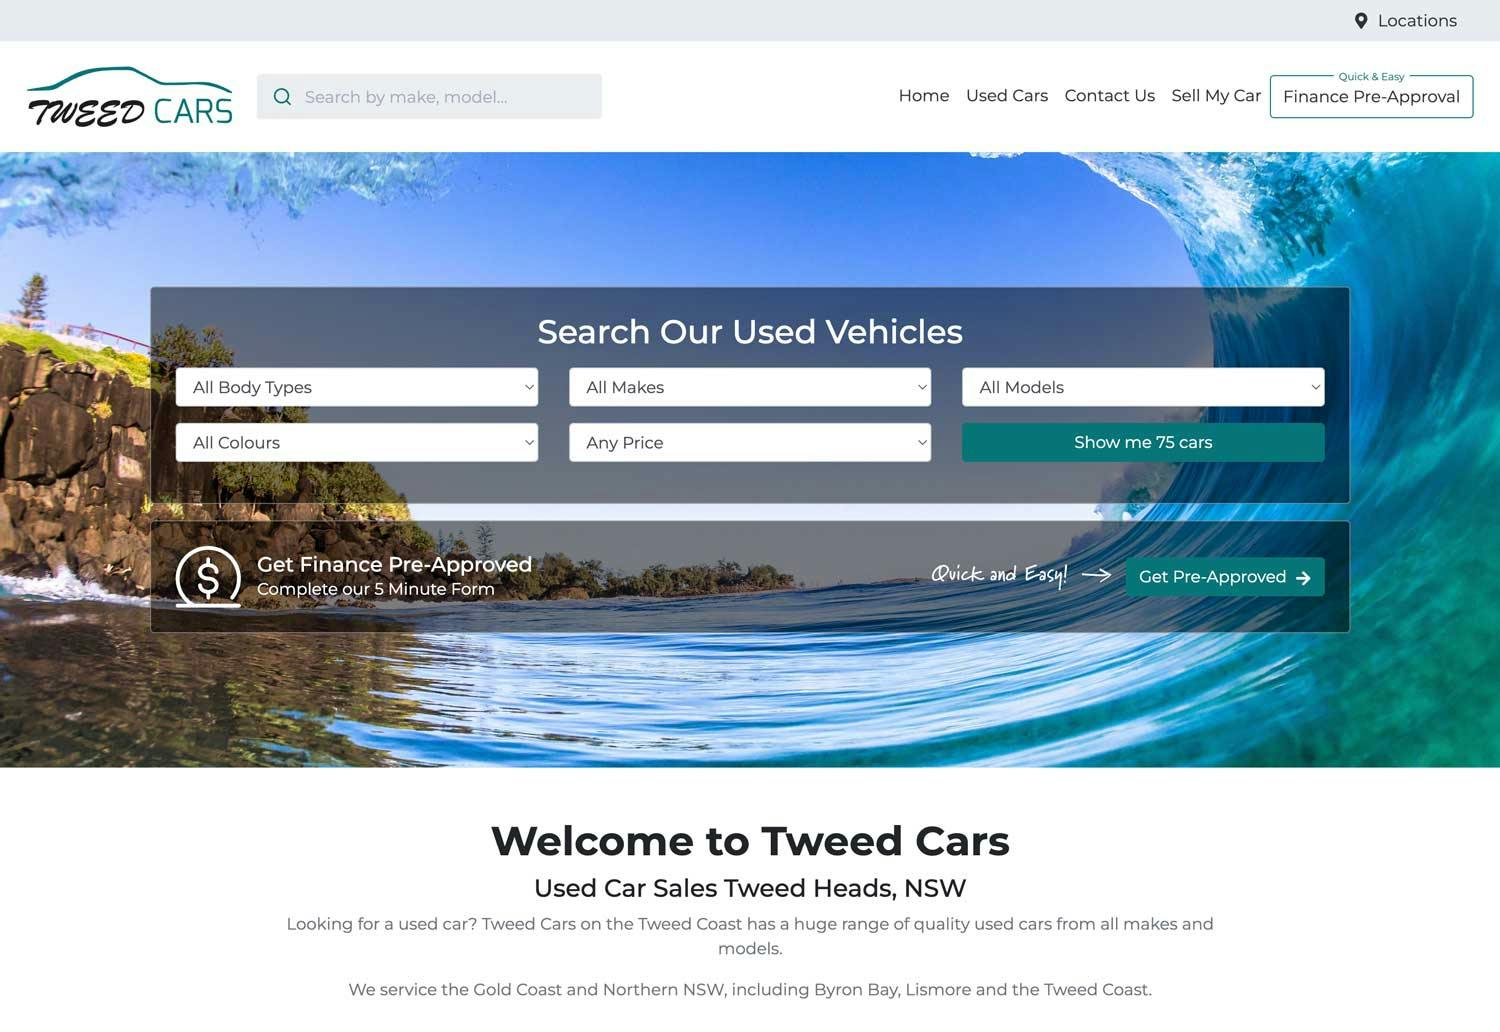 A screen shot of the Tweed Cars website